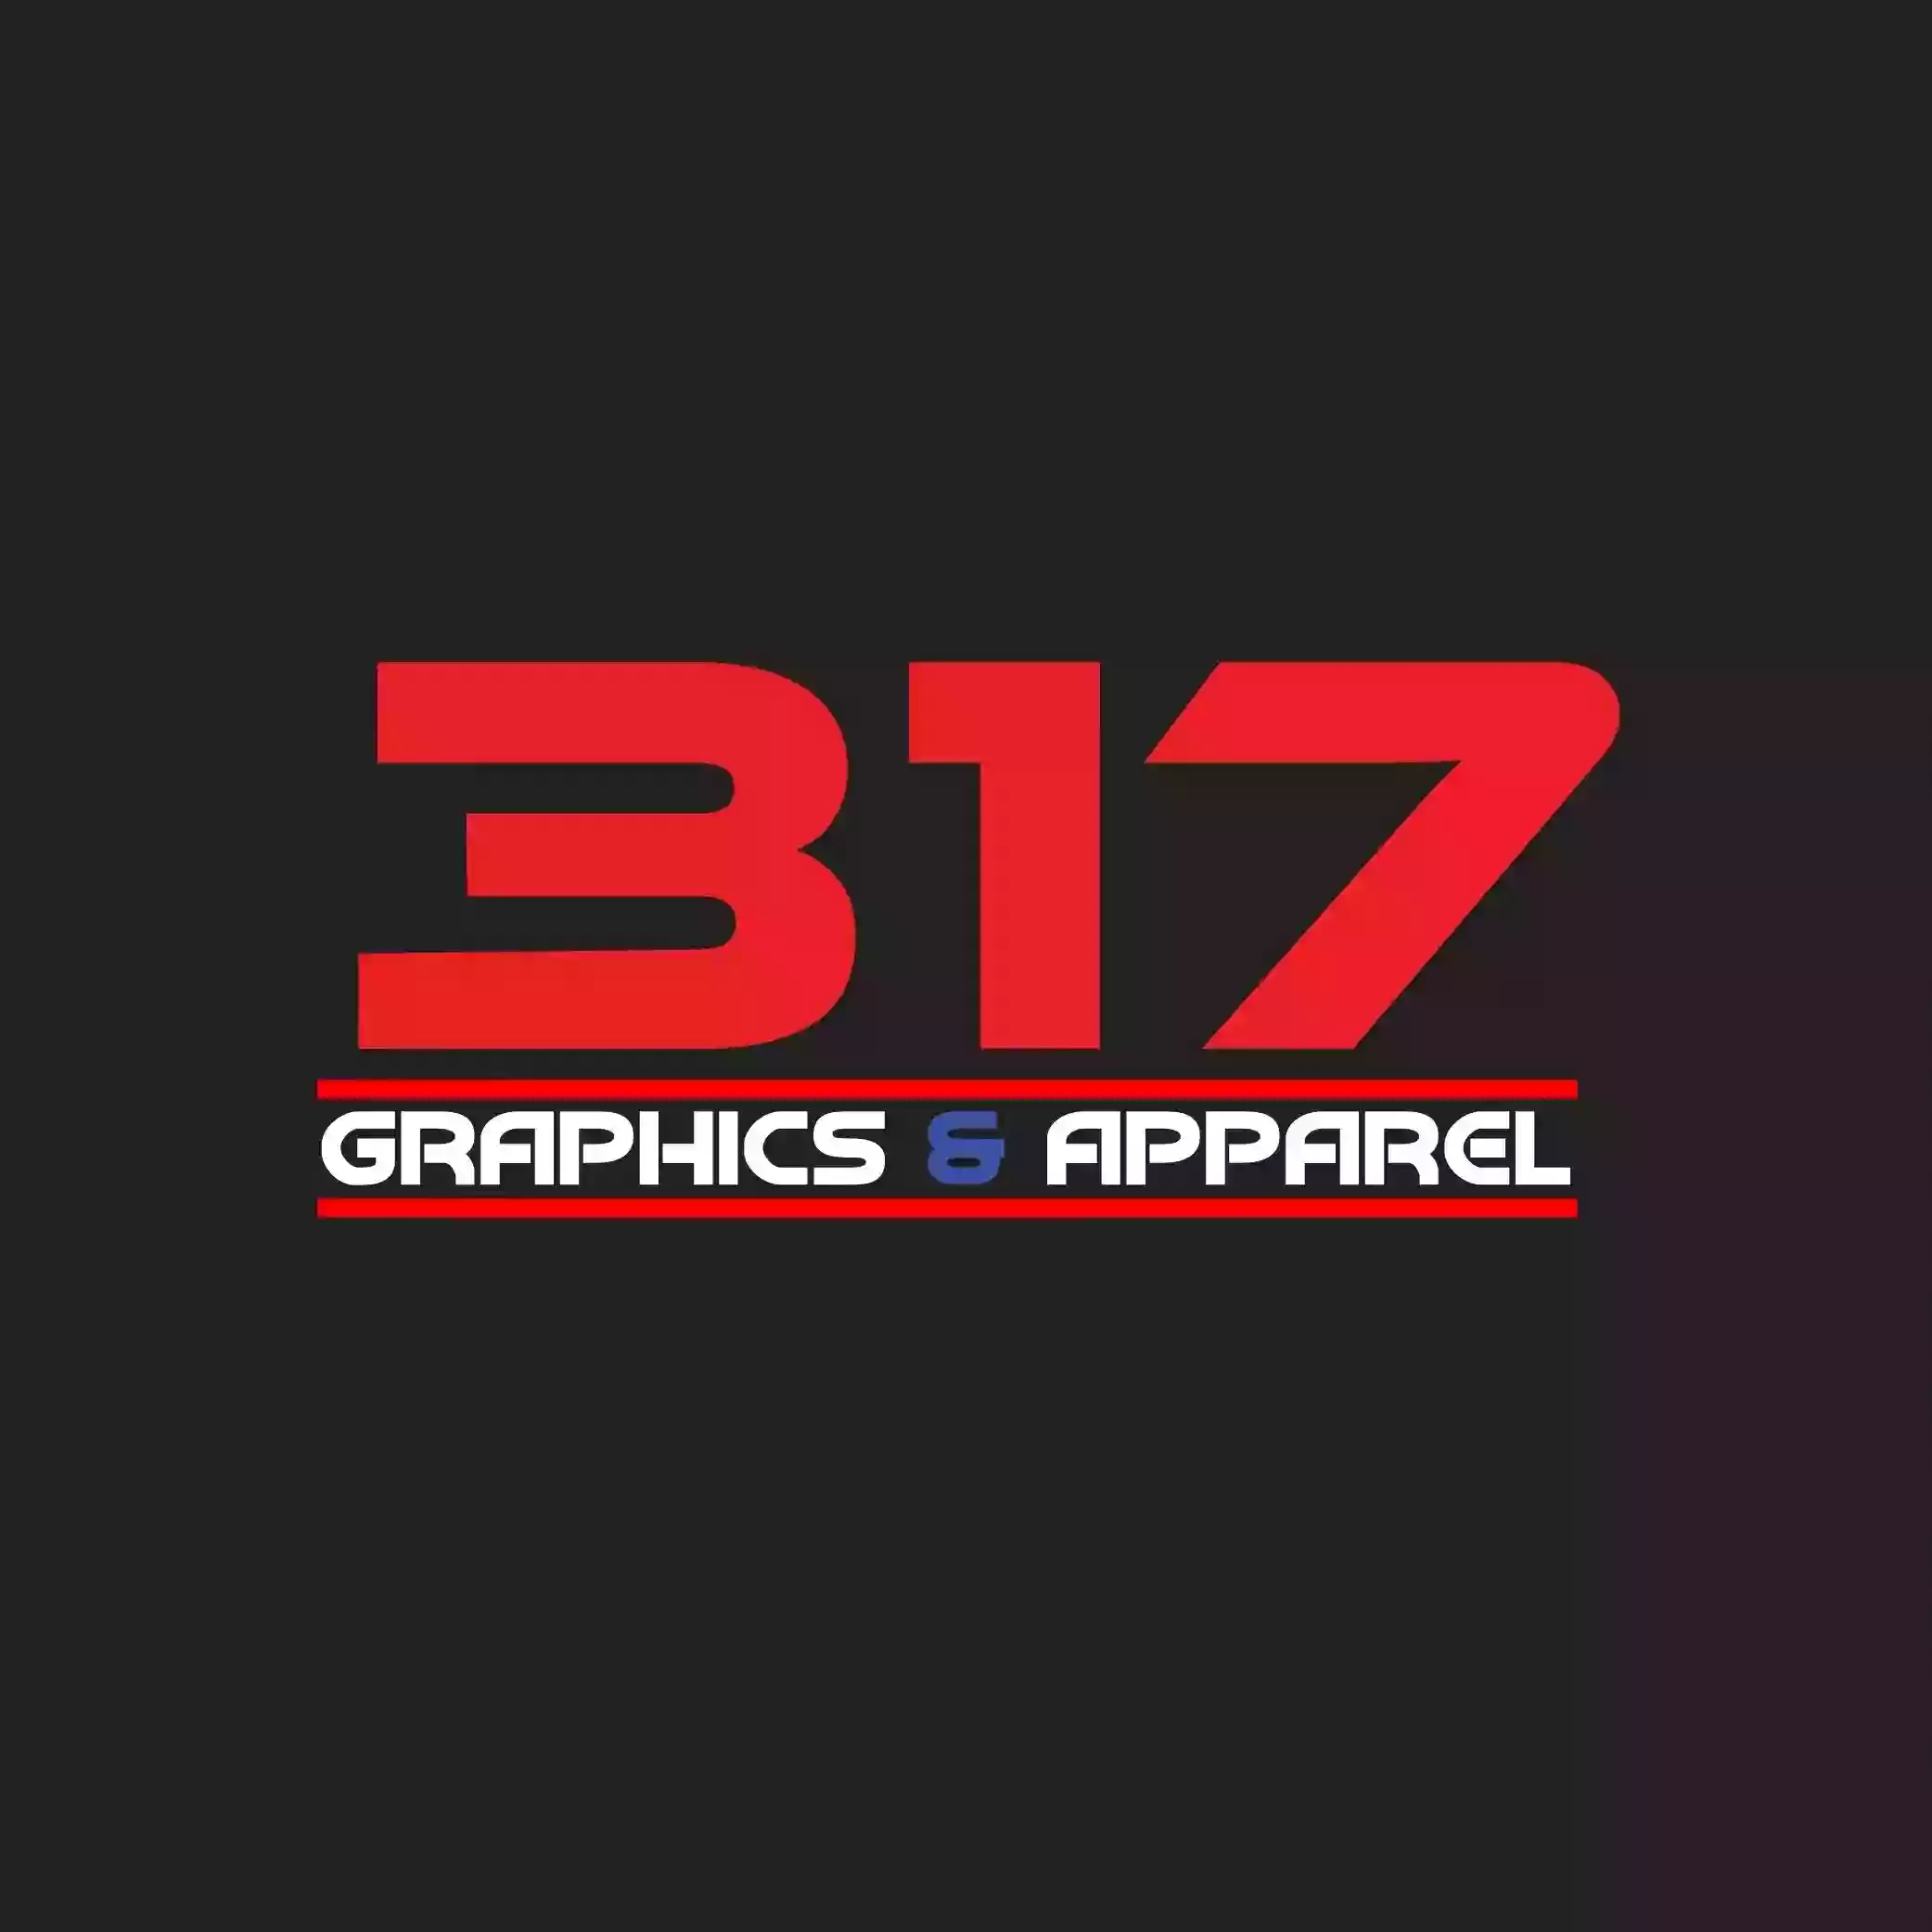 317 Graphics and Apparel